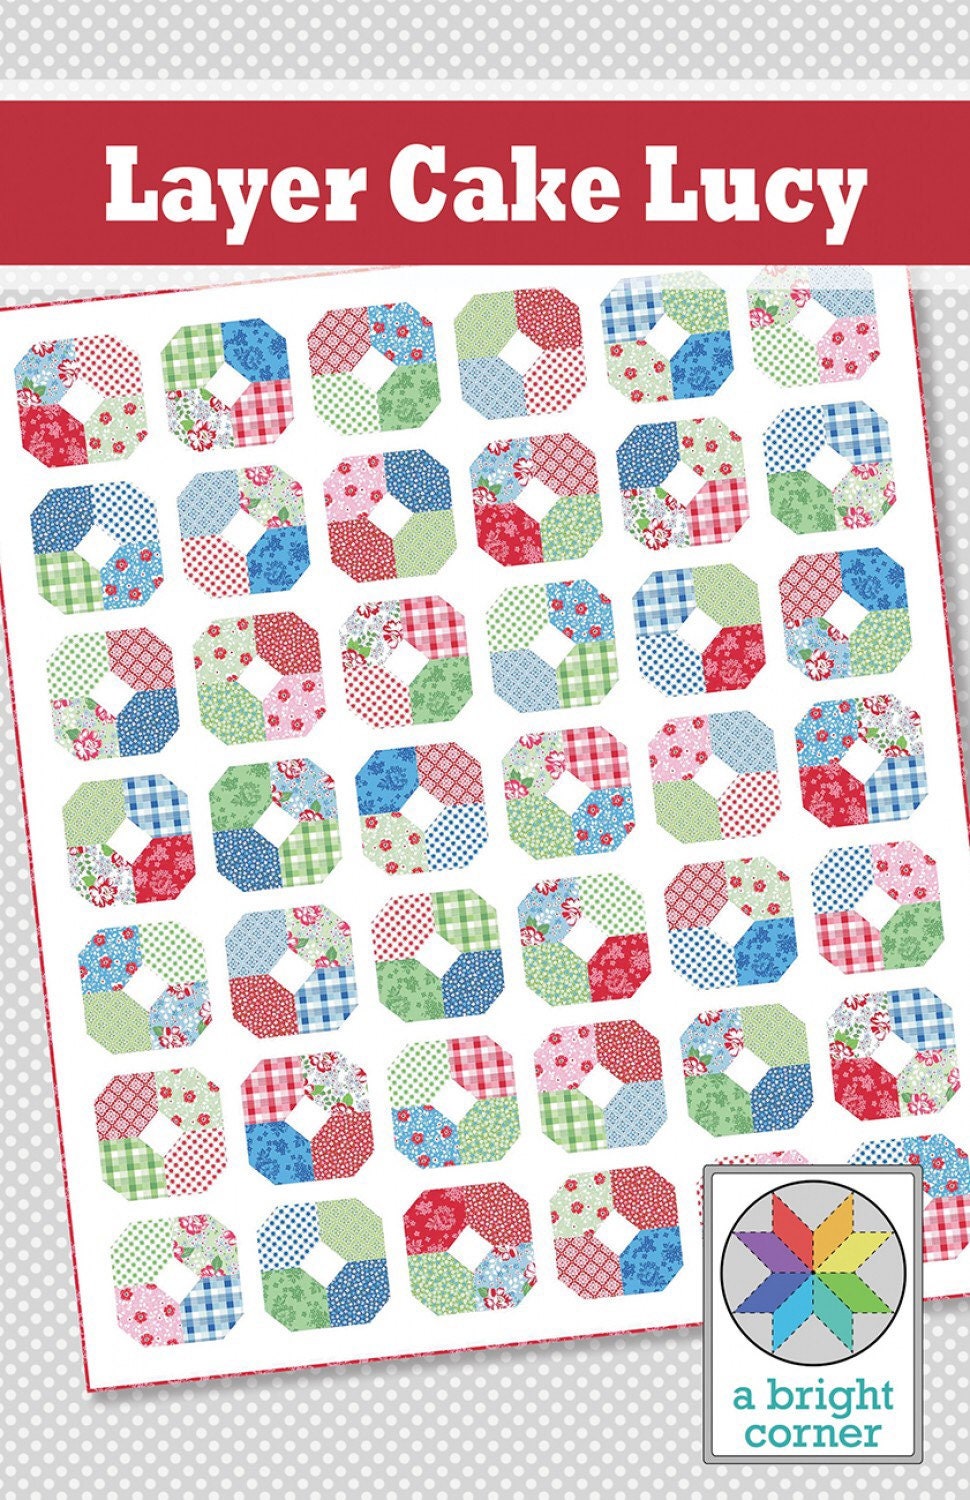 Layer Cake Lucy Quilt Pattern - A Bright Corner - Layer Cake Friendly - 67” x 77.5”